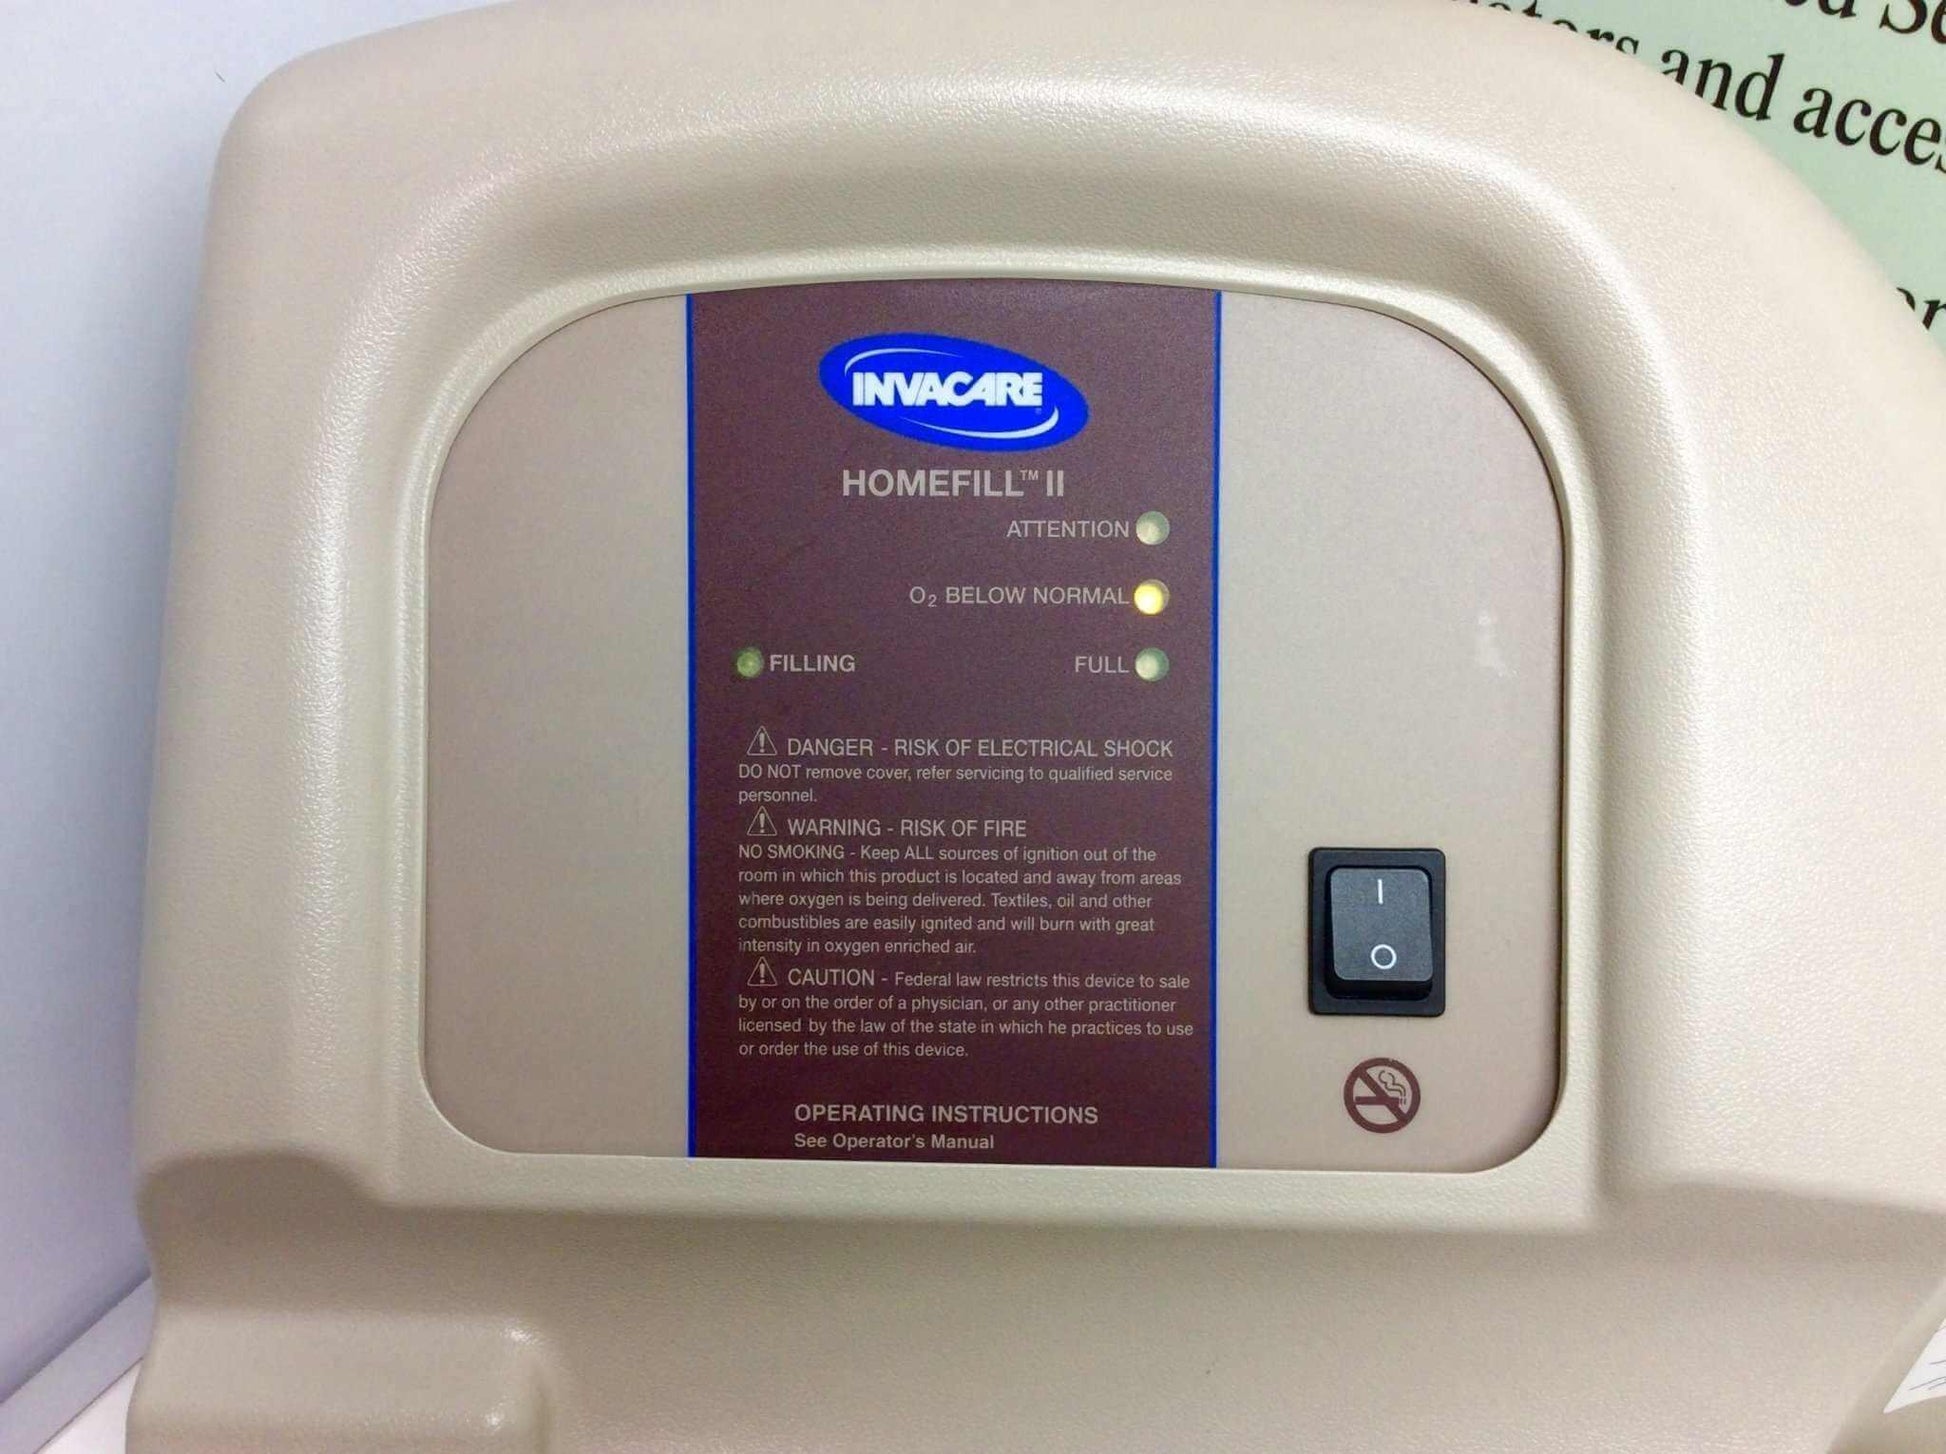 REFURBISHED Invacare HomeFill II IOH200 Warranty FREE Shipping - MBR Medicals